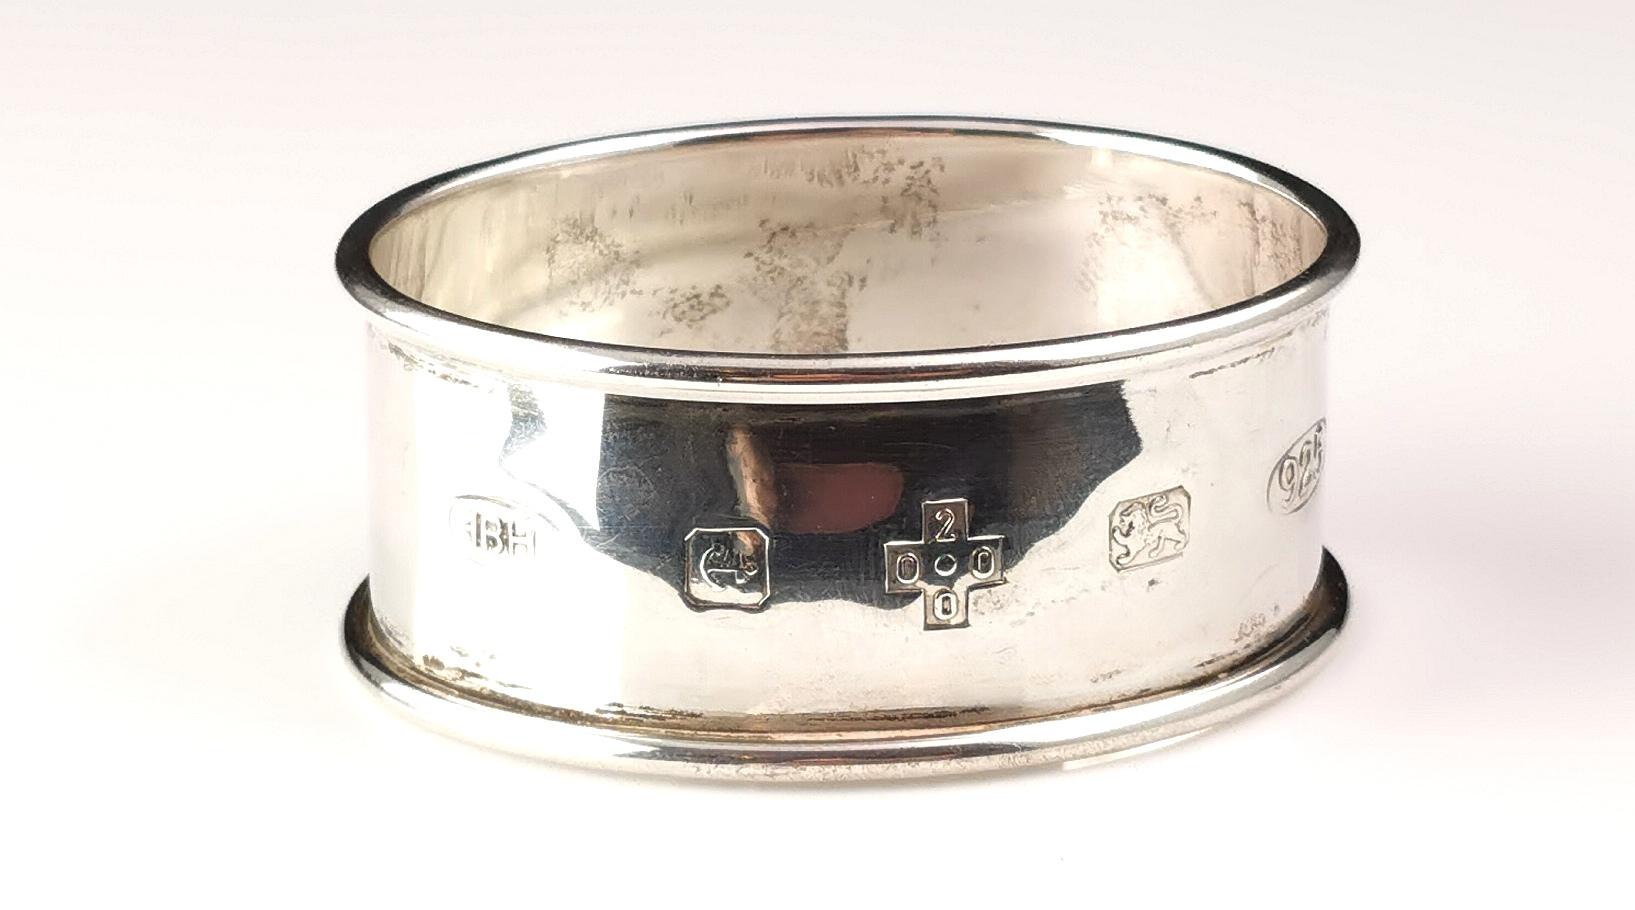 A stylish vintage sterling silver napkin ring.

It is a plain oval shaped napkin ring with a polished finish and with hallmarking to the front including the millennium mark.

It is fully hallmarked for sterling silver, Birmingham assay office, 2000,